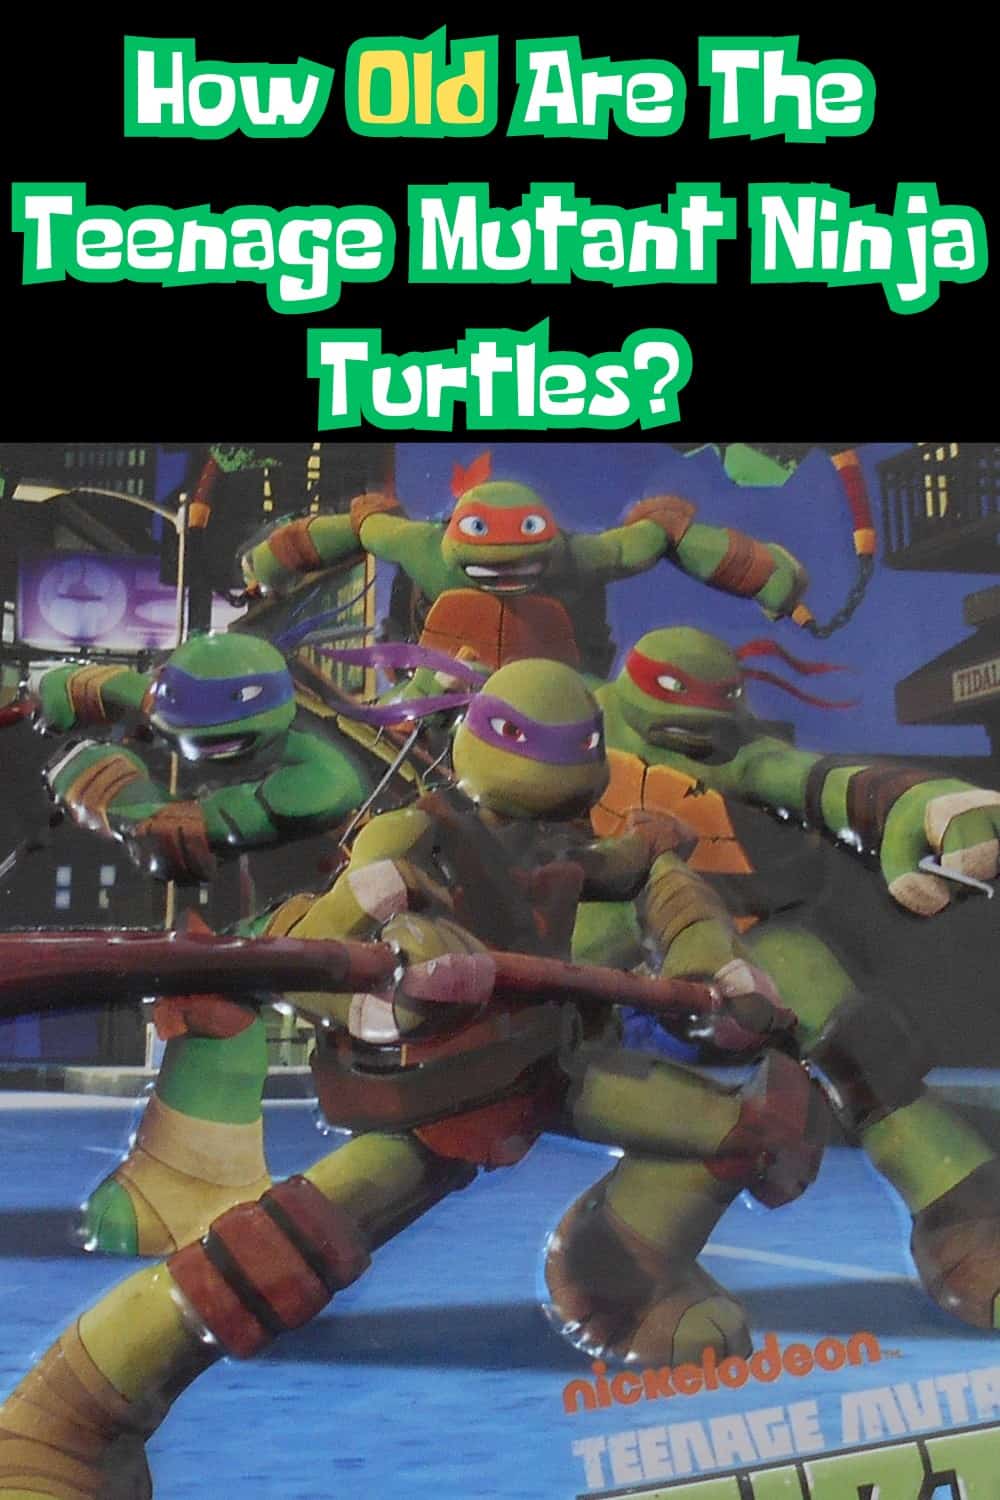 The Ninja Turtles are between 15 years and 17 years of age